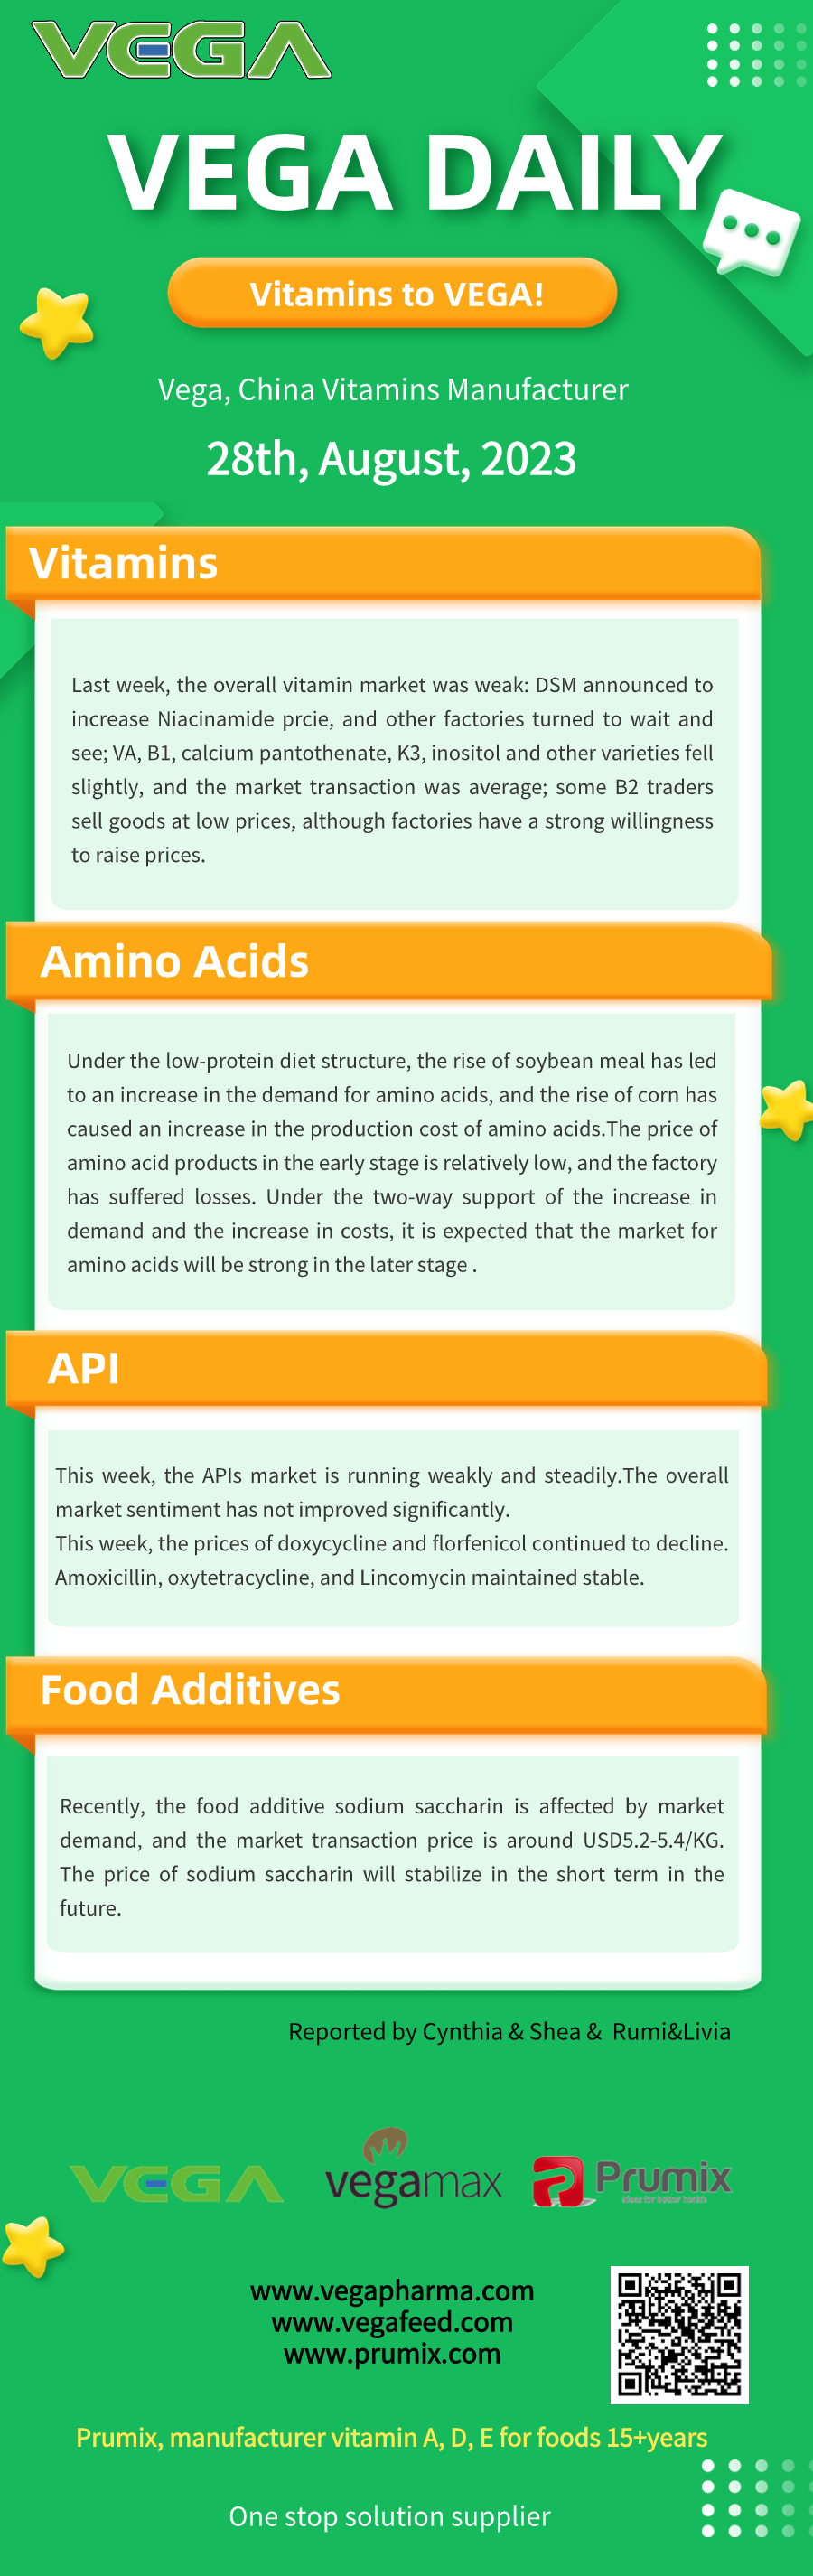 Vega Daily Dated on August  28th 2023 Vitamin Amino Acid API Food Additives.png